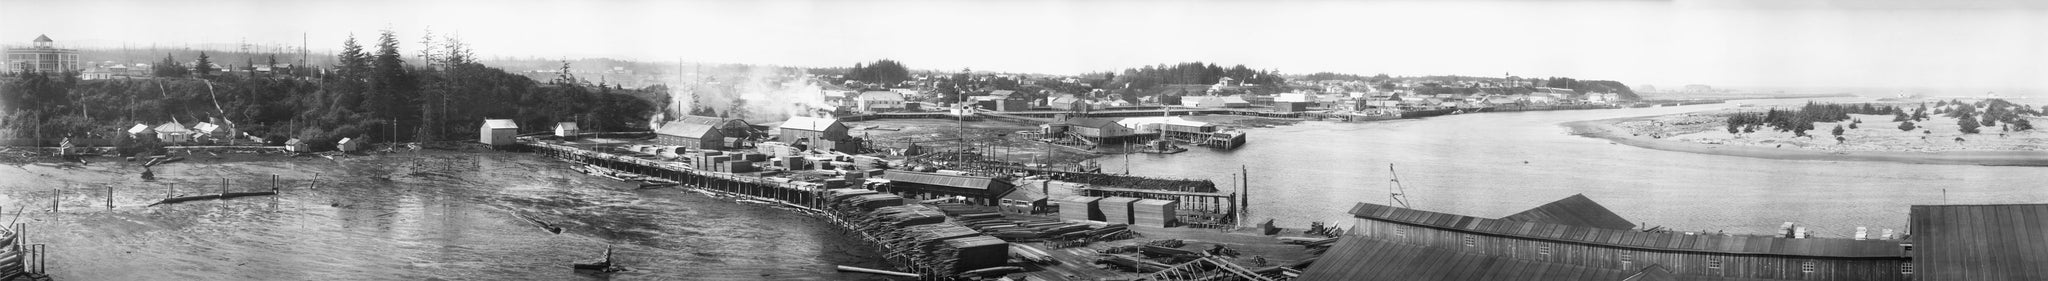 F. W. Sheelor, a pioneer of panoramic photography, took this photograph of Bandon’s harbor and mills from the water tower of Moore Mill. -- Courtesy Bandon Historical Society Museum